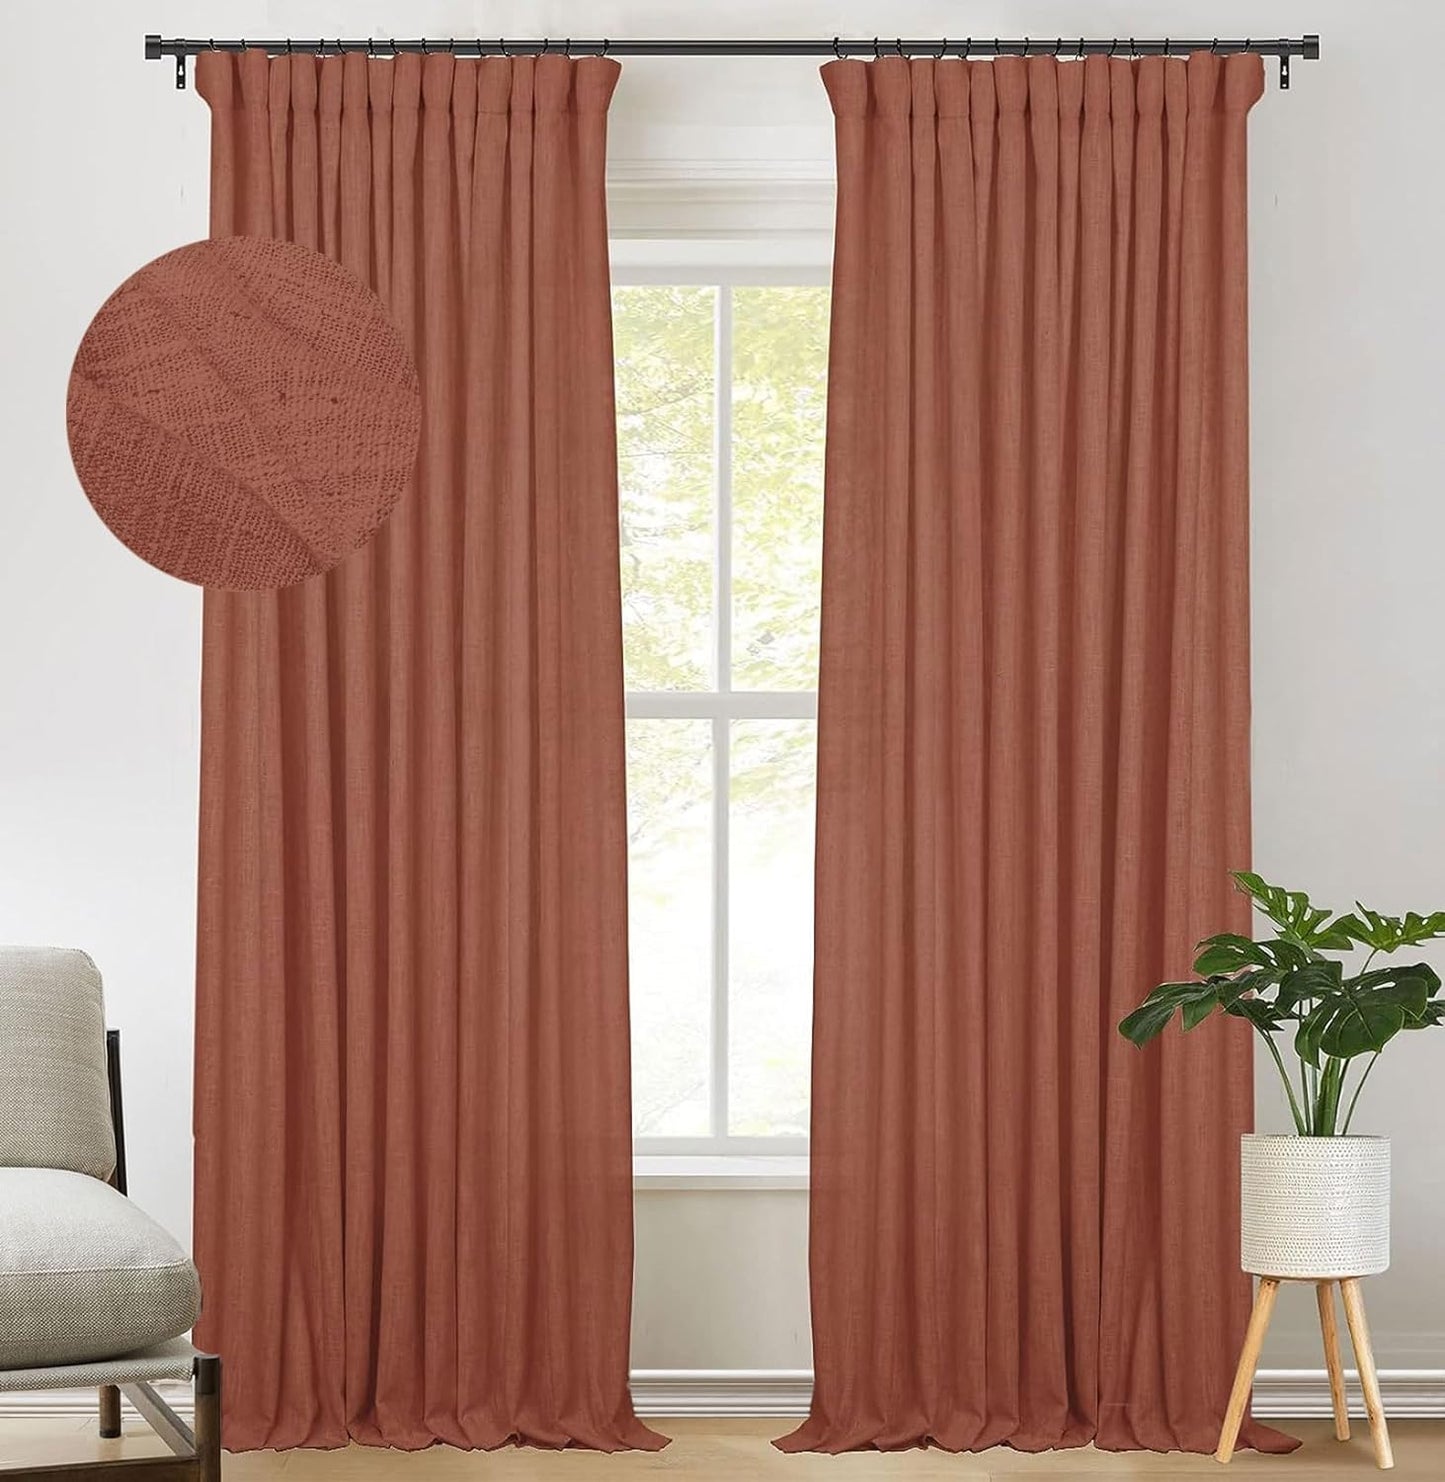 Zeerobee Beige White Linen Curtains for Living Room/Bedroom Linen Curtains 96 Inches Long 2 Panels Linen Drapes Farmhouse Pinch Pleated Curtains Light Filtering Privacy Curtains, W50 X L96  zeerobee 10 Terracotta 50"W X 84"L 